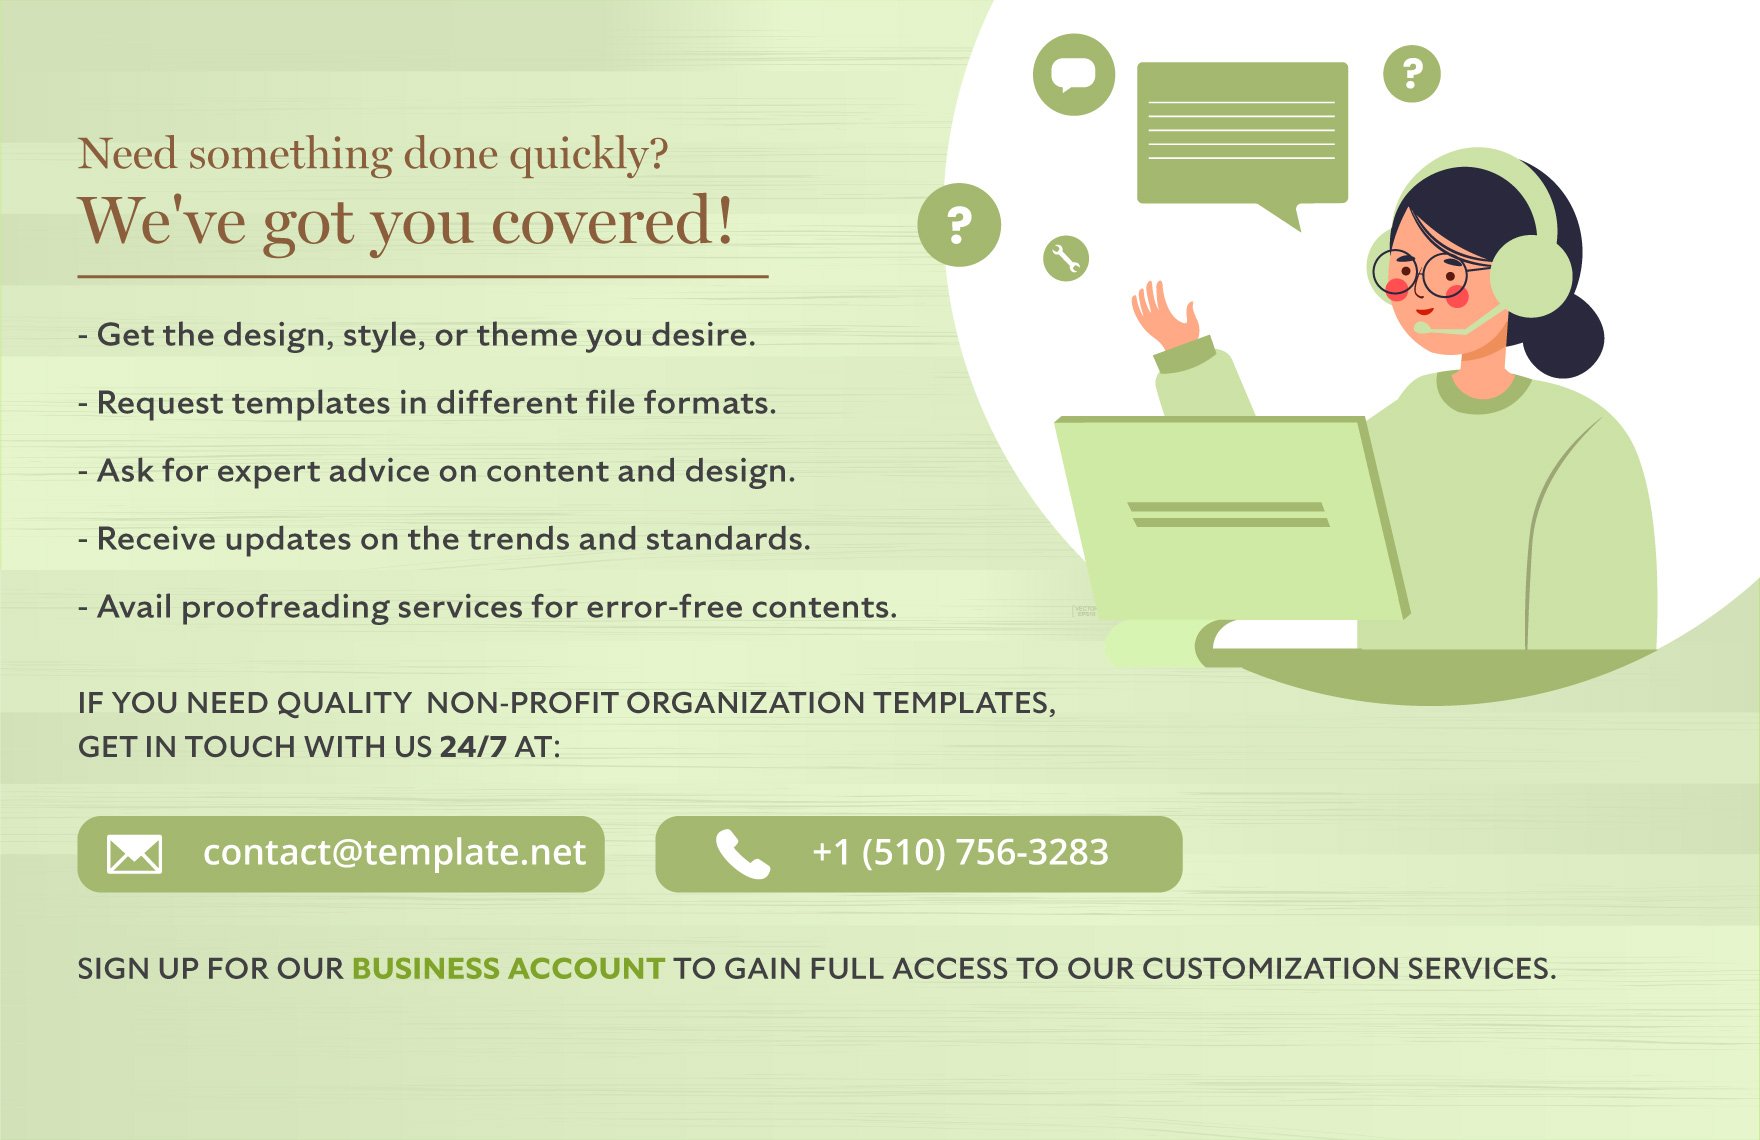 Nonprofit Organization Email Performance Report Template